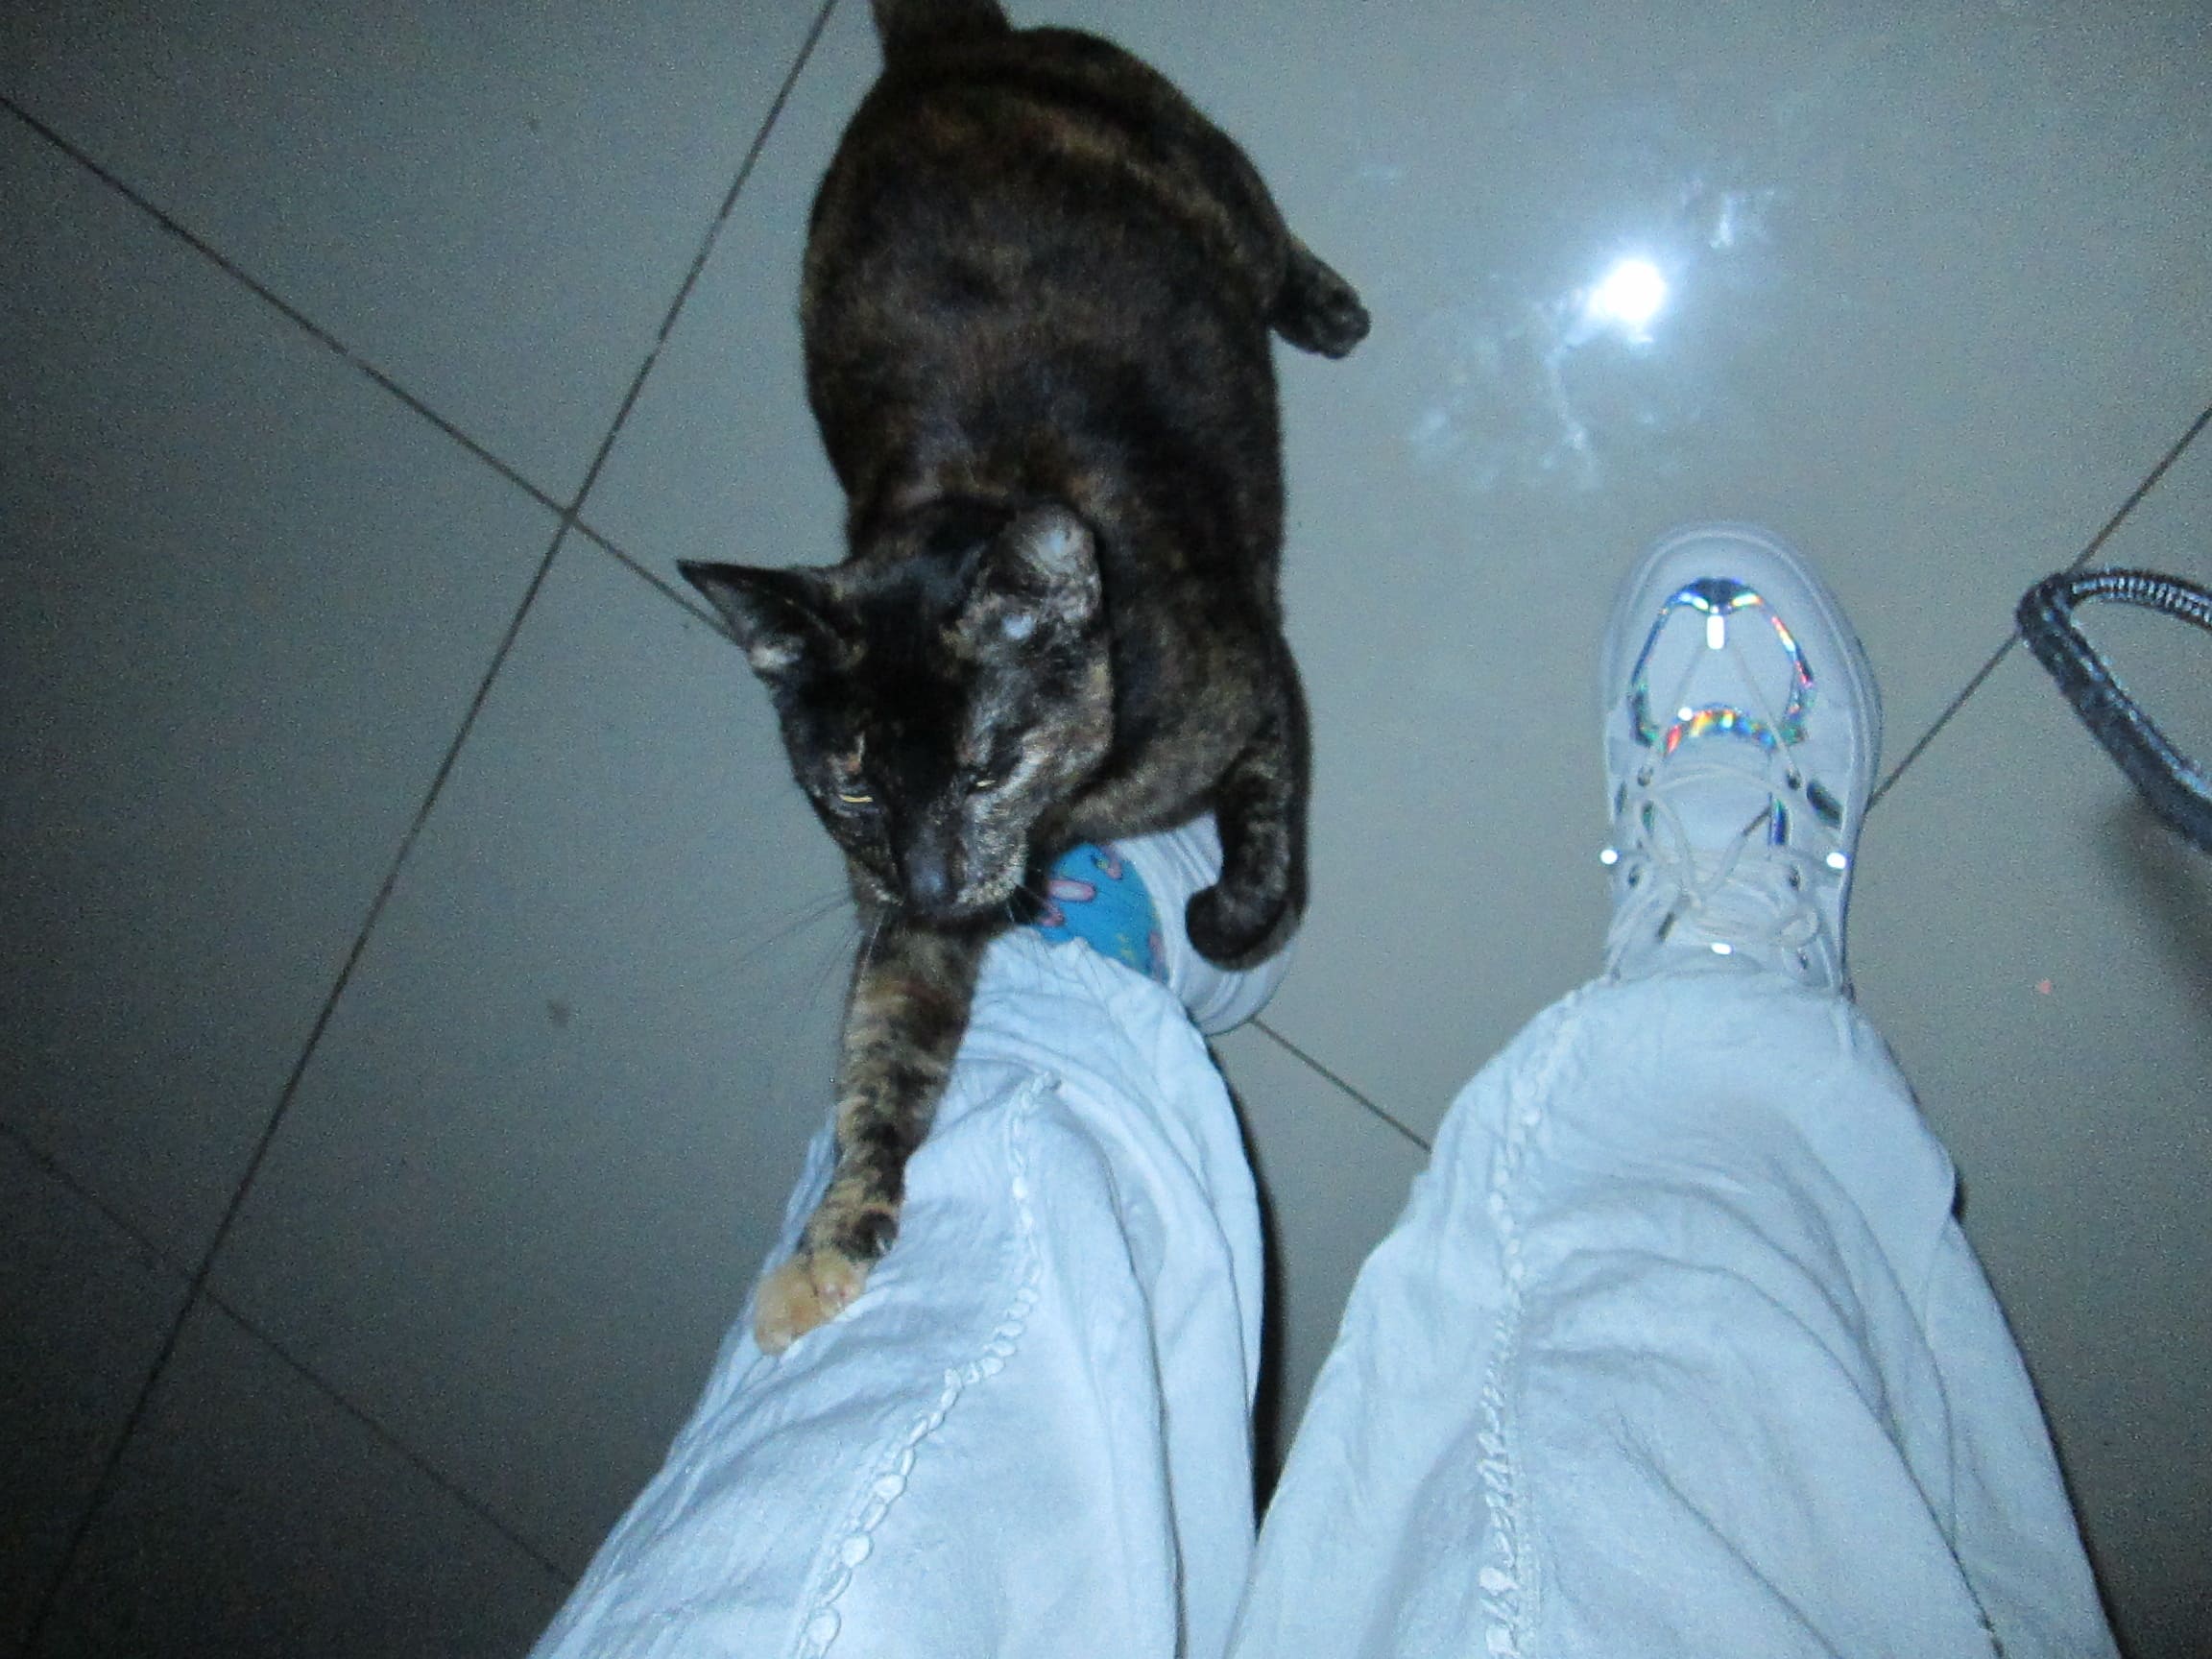 a tortoiseshell cat trying to climb up someones white pants